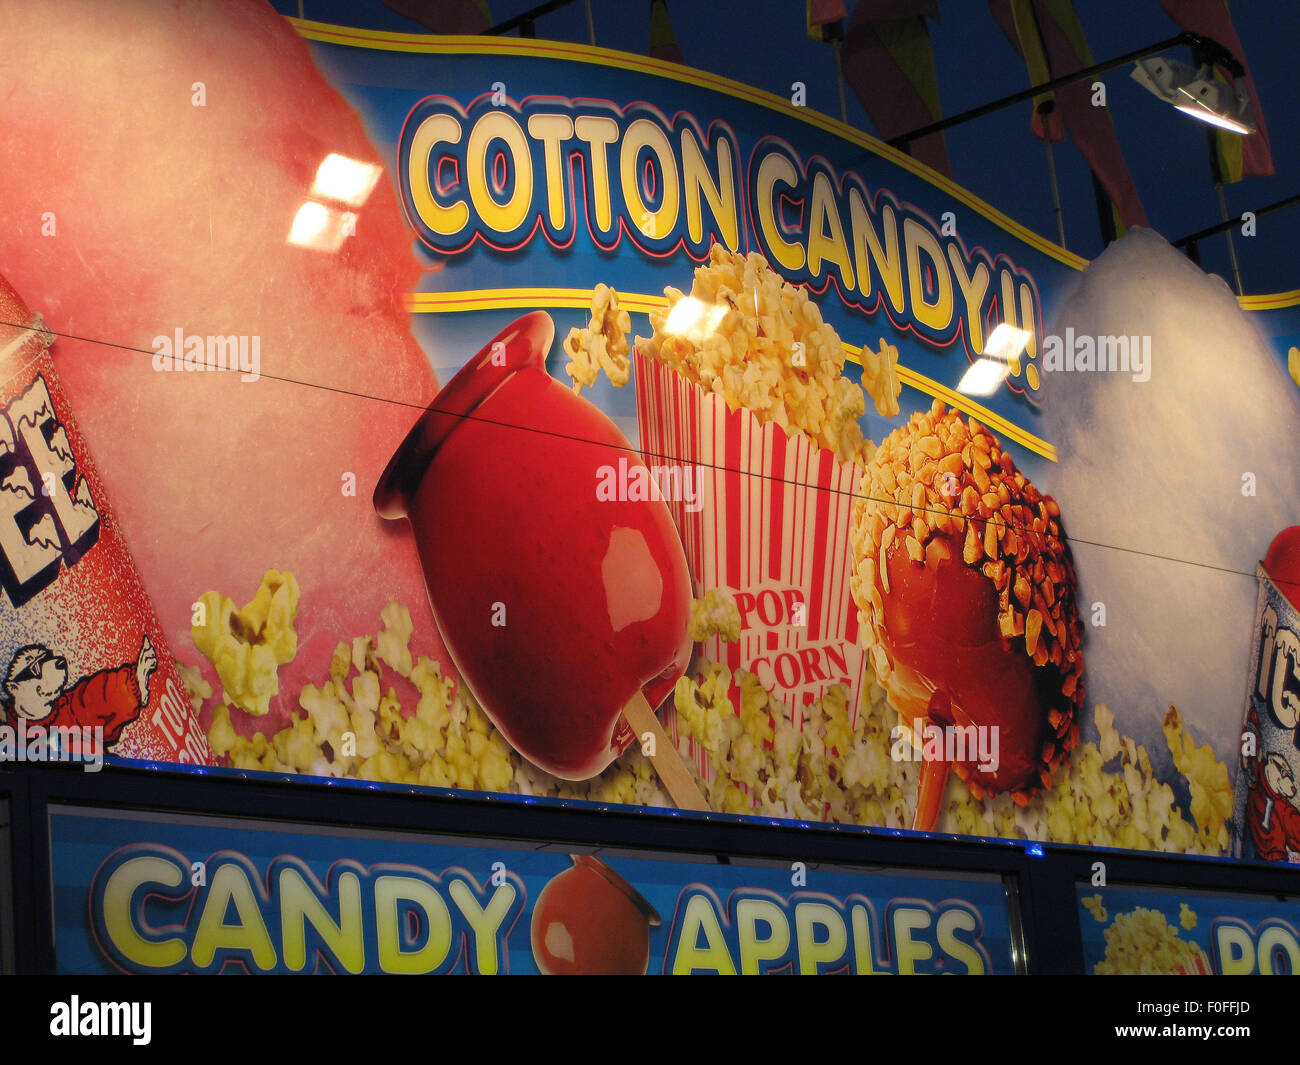 Cotton Candy sign at The County Fair Stock Photo